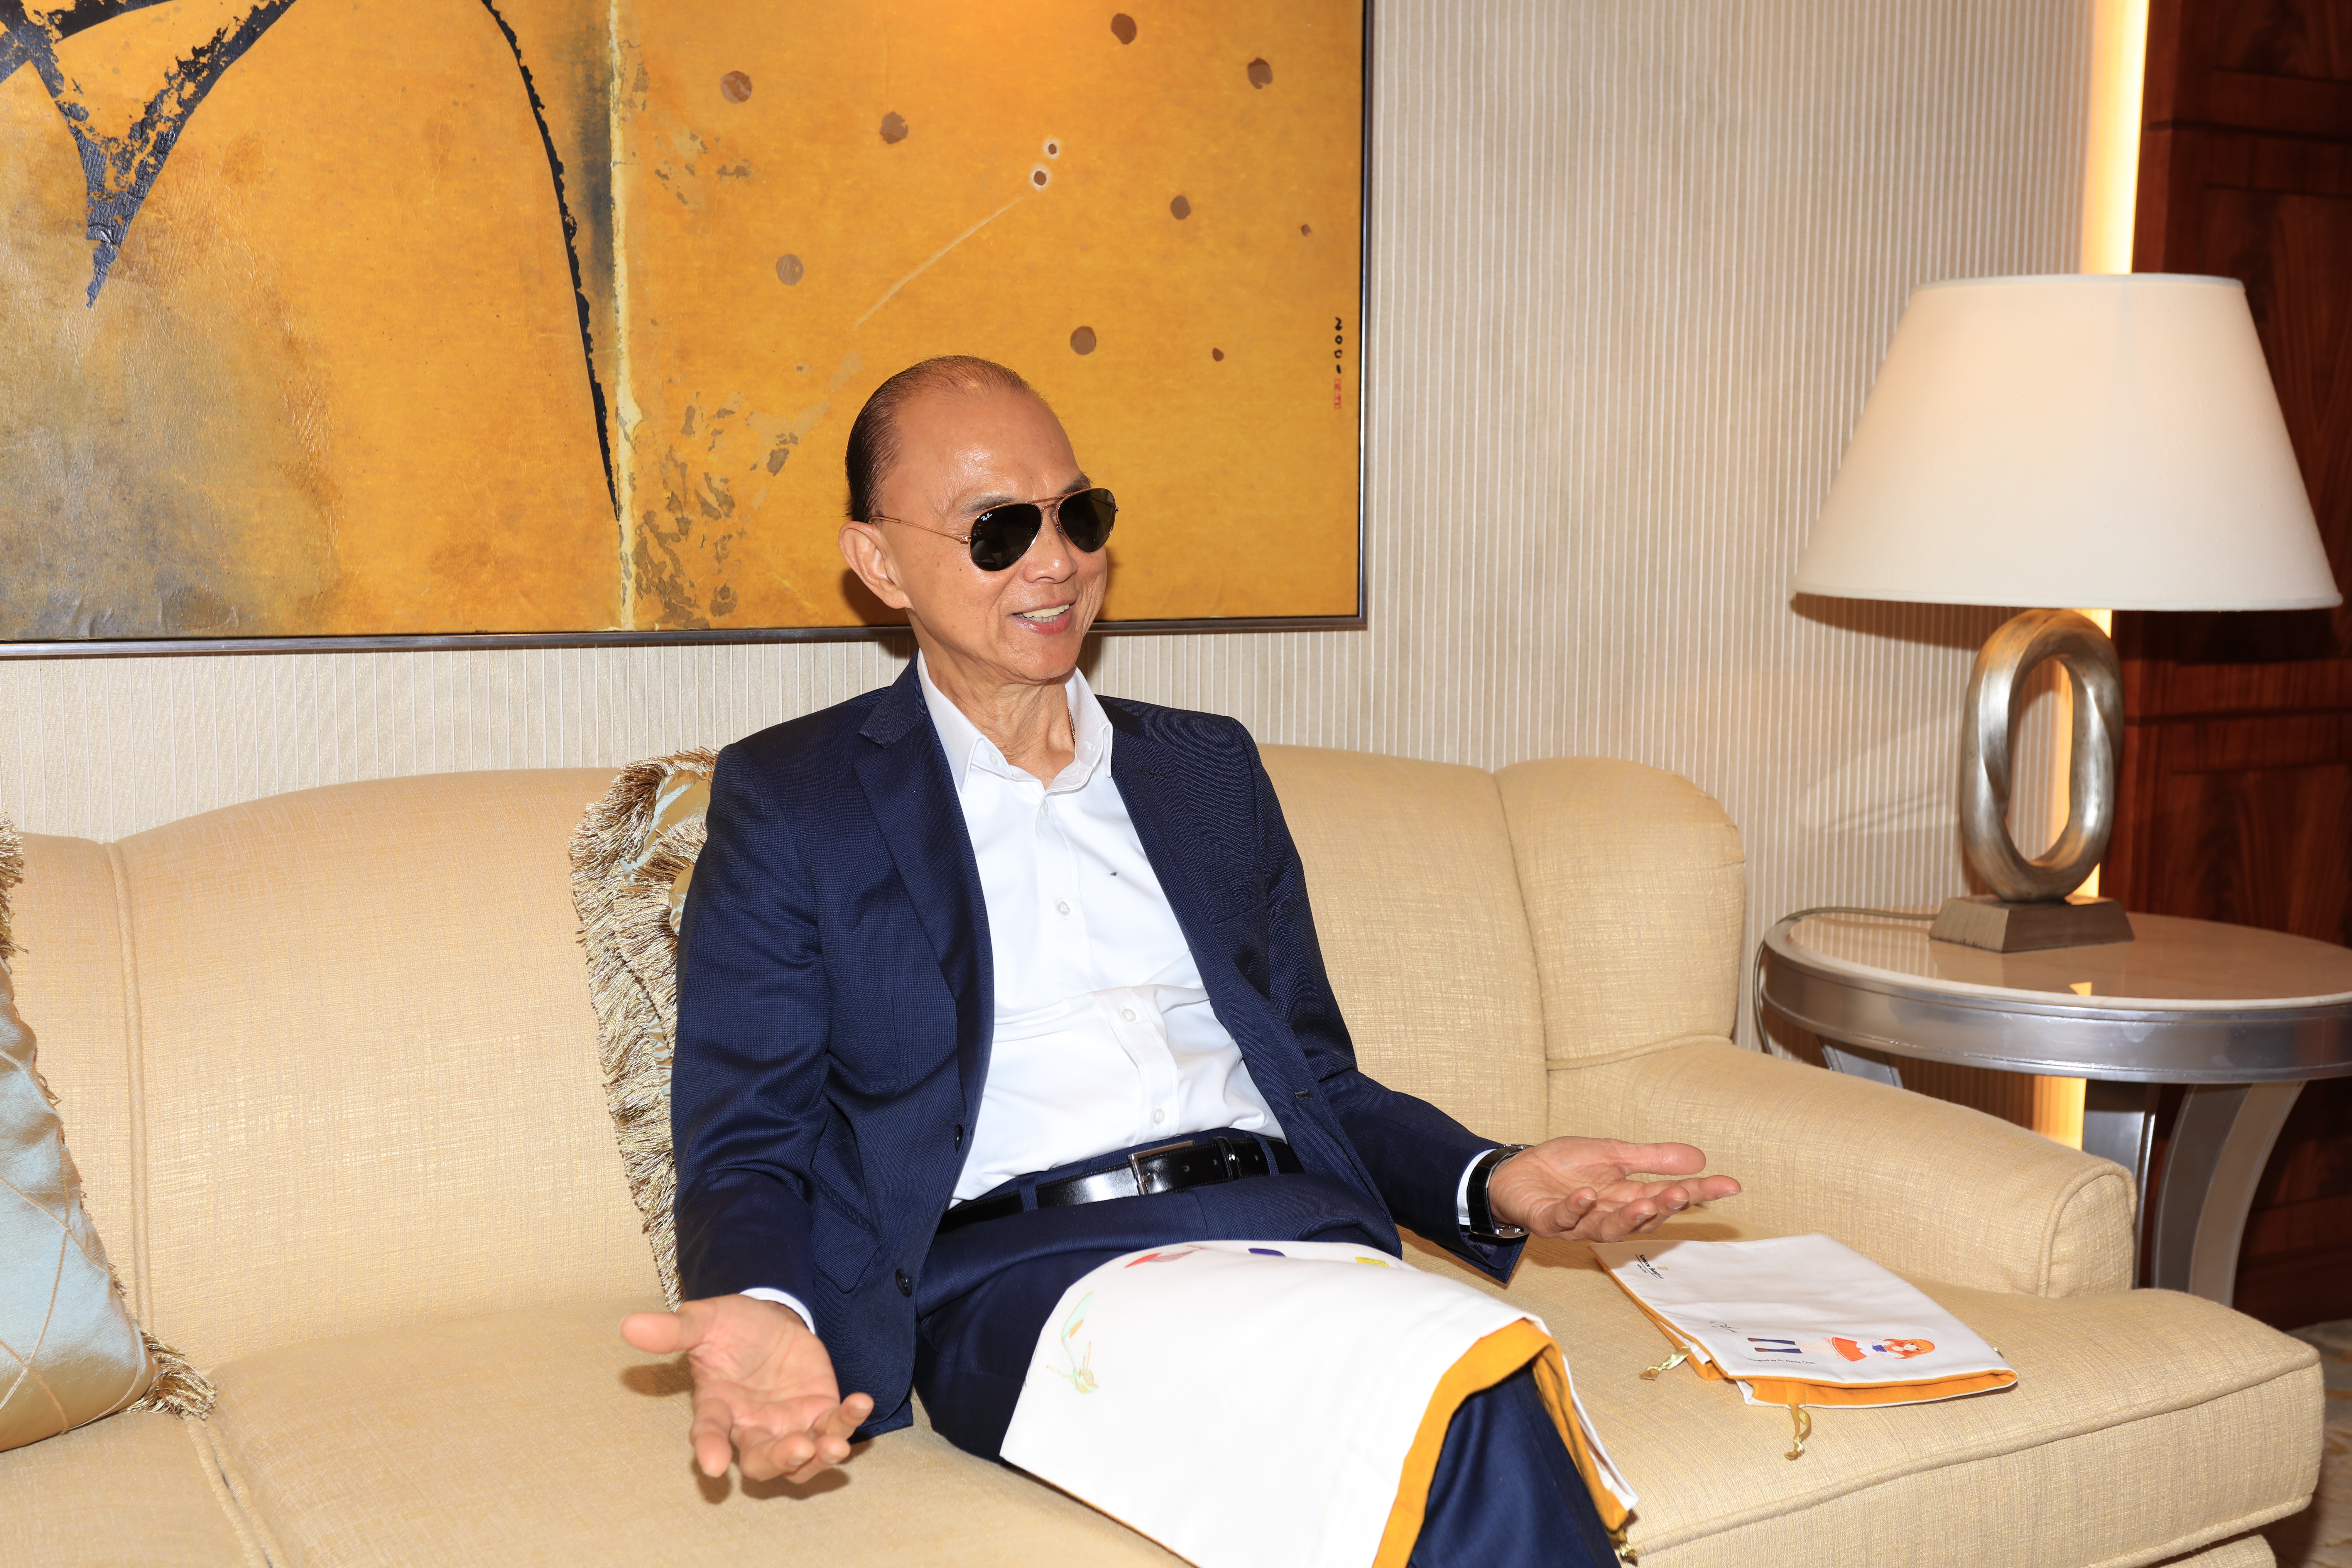 Designer Jimmy Choo and son Danny team up with Kowloon Shangri-La